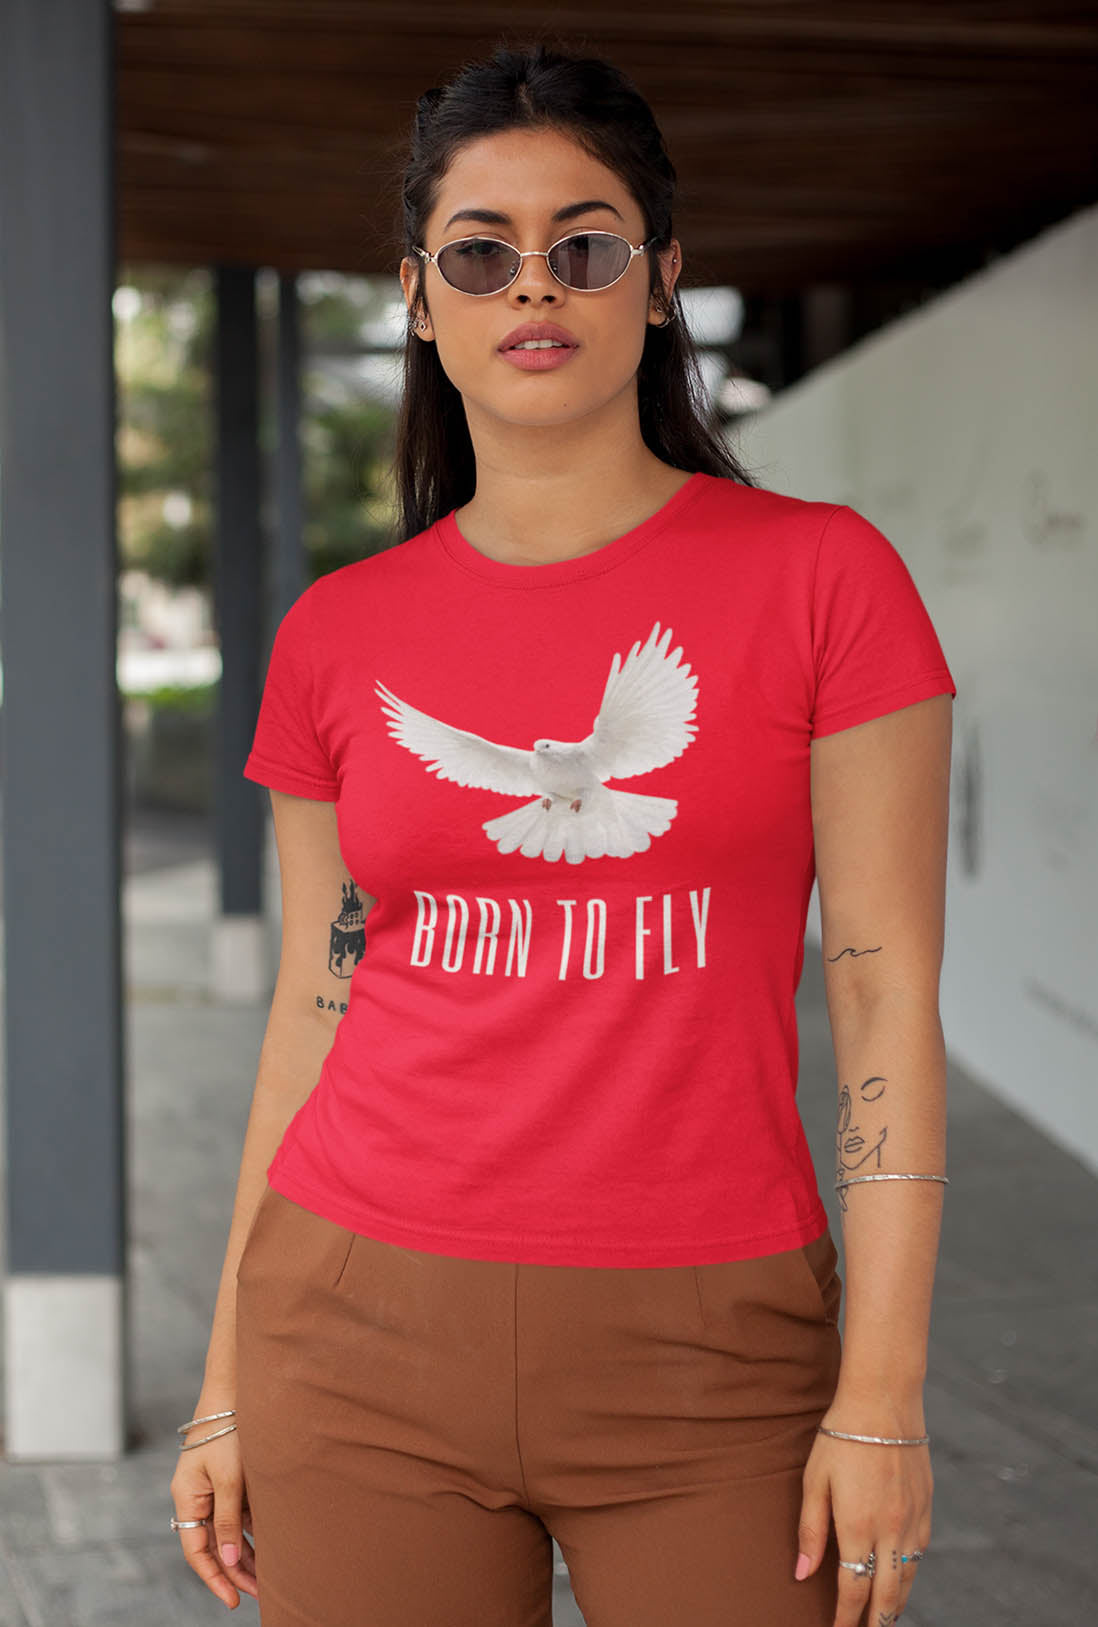 Born To Fly Women's Cotton T-Shirt